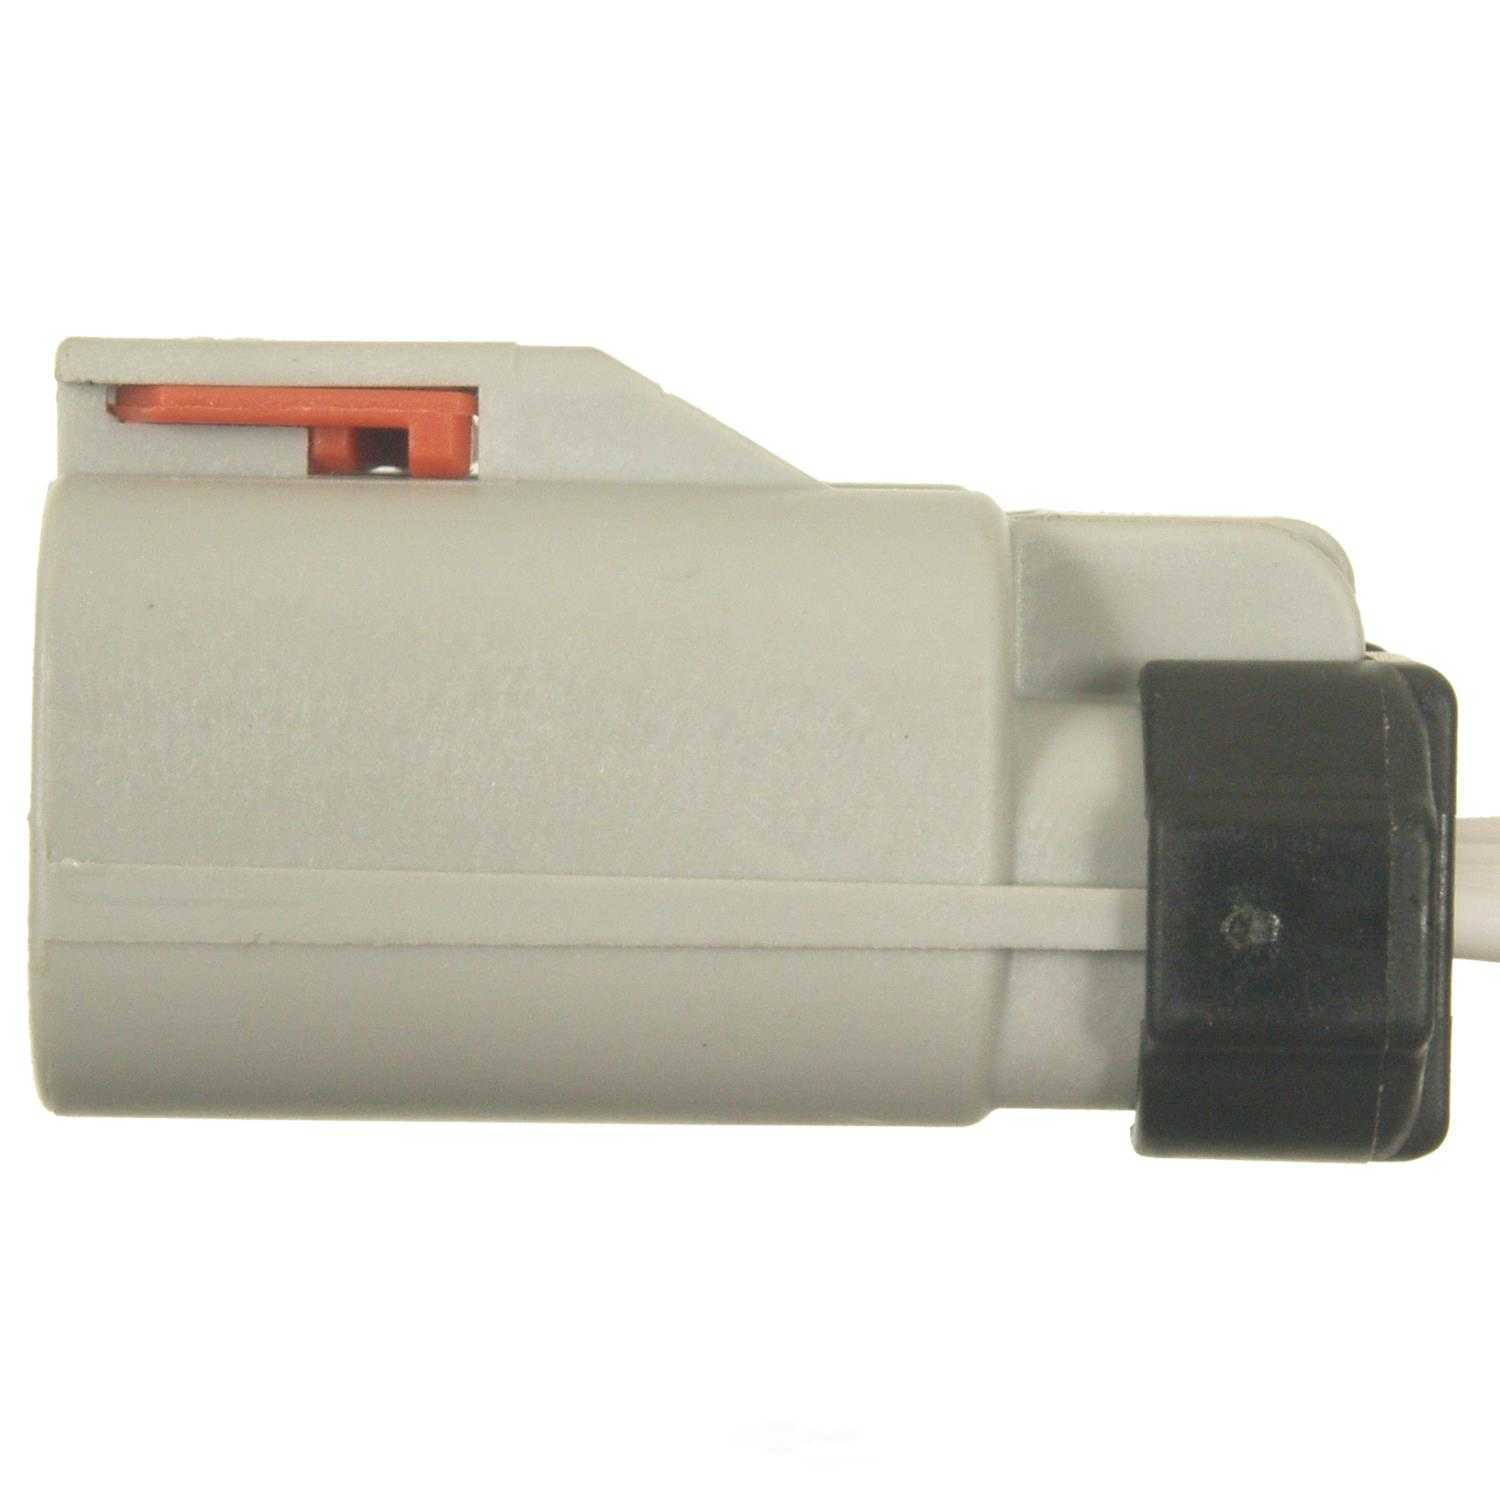 STANDARD MOTOR PRODUCTS - Diesel Particulate Filter(DPF) Pressure Sensor Connector - STA S-1410